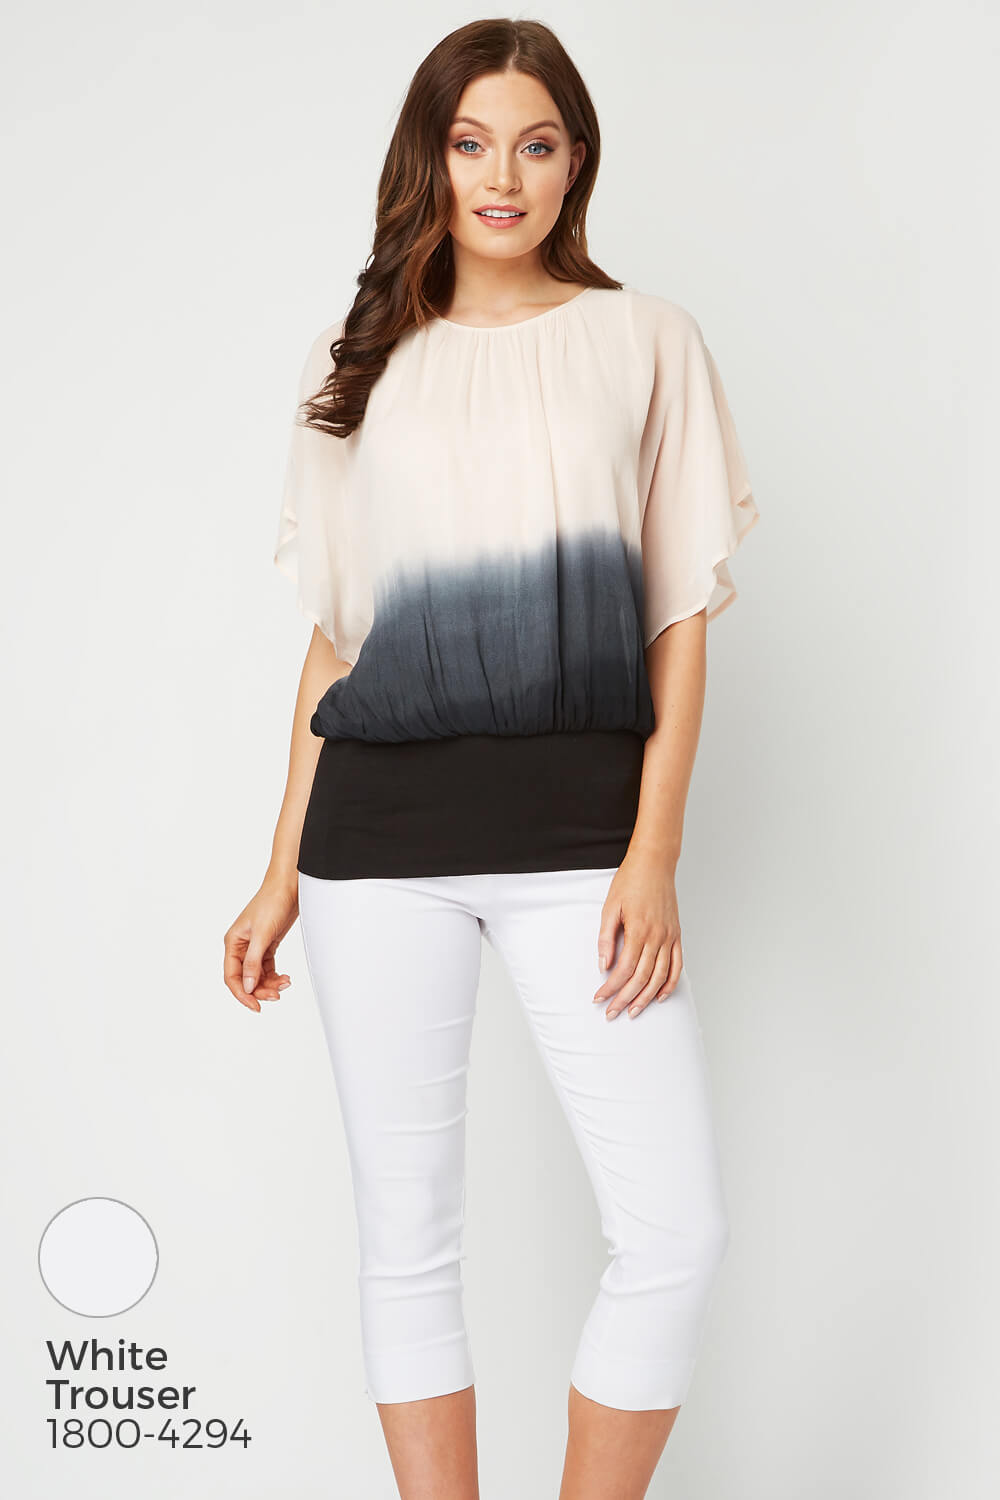 PINK Ombre Batwing Top, Image 6 of 8